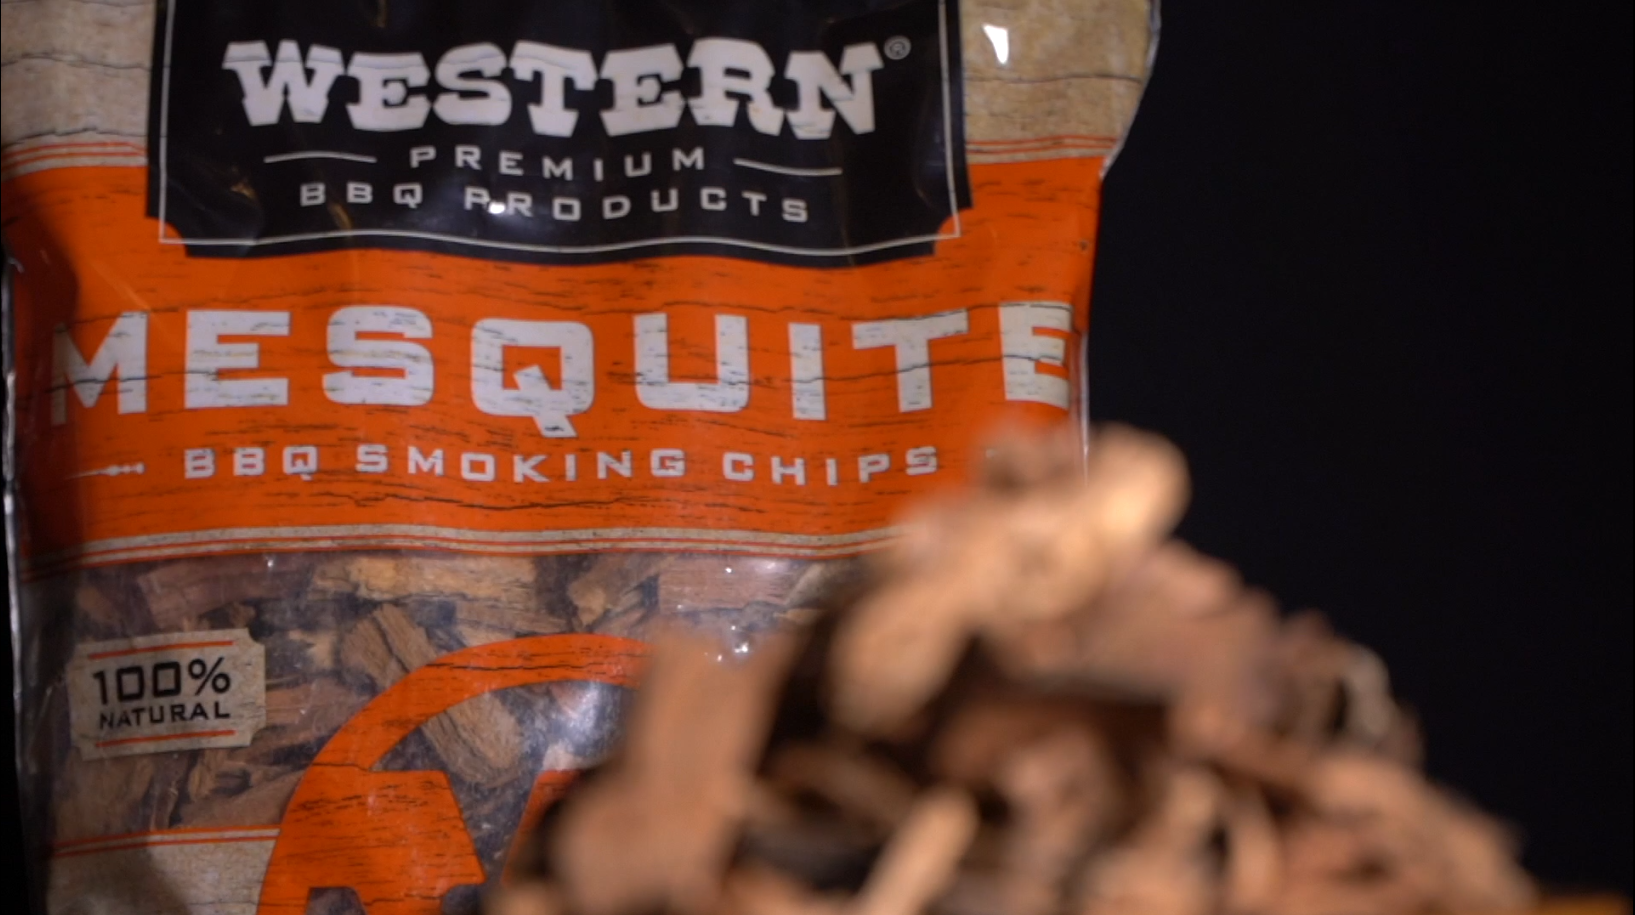 Western Premium BBQ Products Mesquite Smoking Chips, 180 Cu in - image 2 of 12